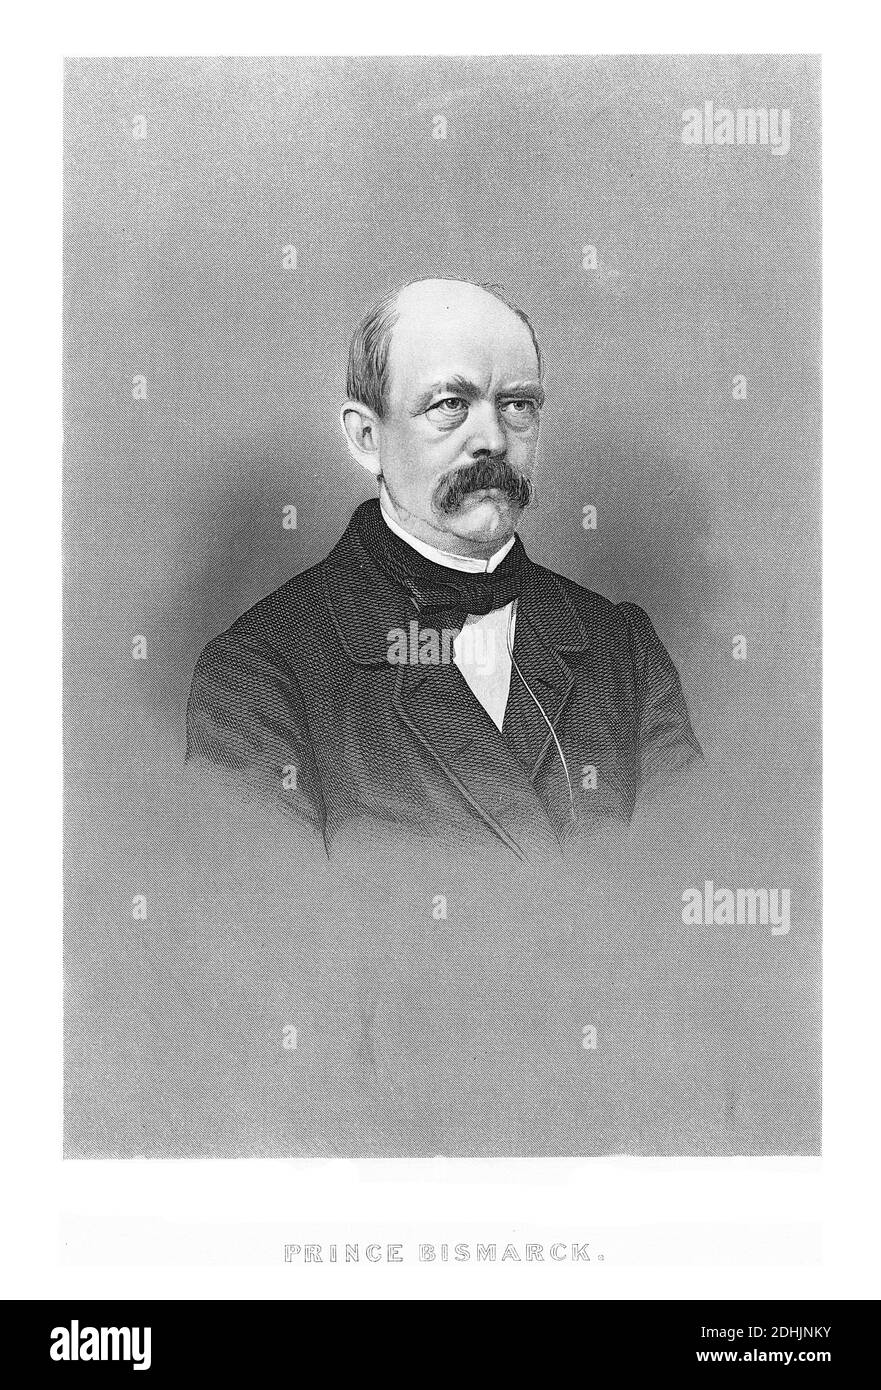 19th Century Illustration Of Portrait Of Prince Bismarck Otto Von Bismarck 1 April 1815 30 July 18 Was A Conservative Prussian Statesman Who Stock Photo Alamy